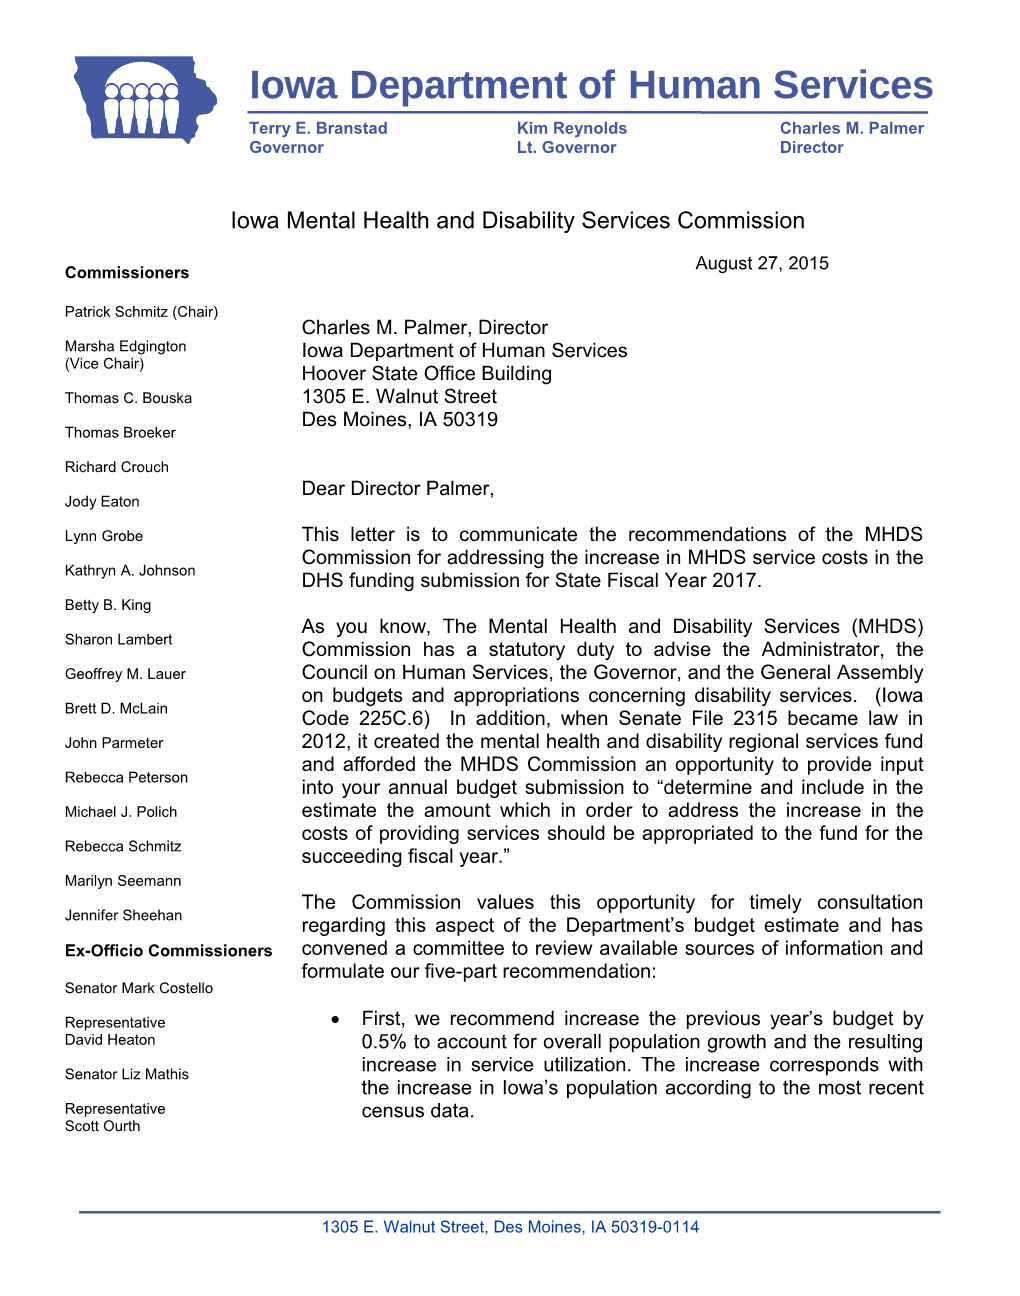 Iowa Mental Health and Disability Services Commission